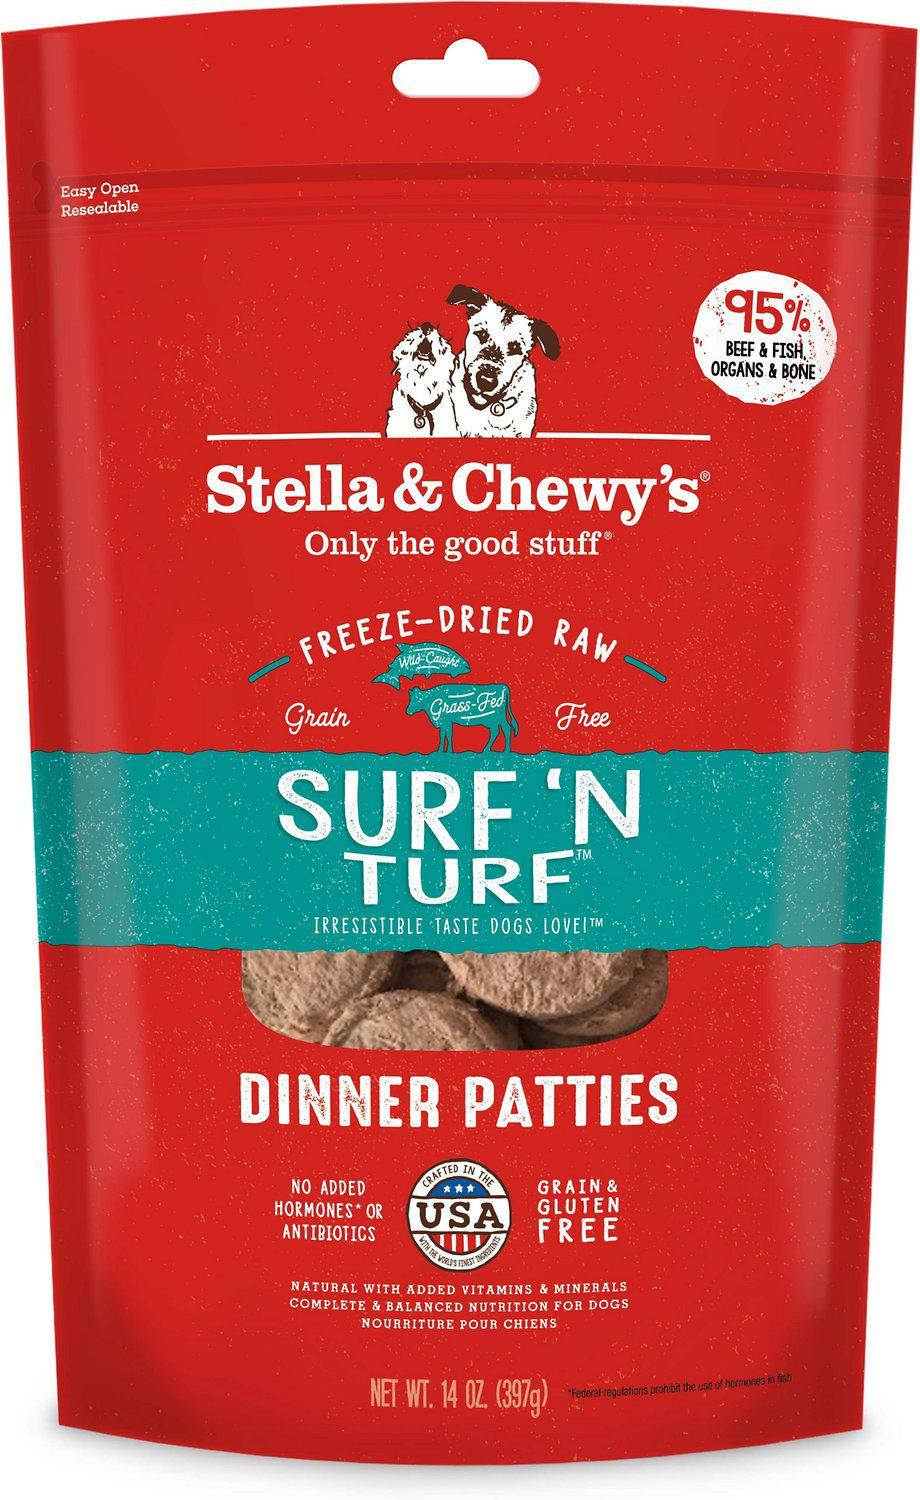 Stella & Chewy's Surf ‘N Turf Grain-Free Freeze-Dried Raw Dinner Patties Dog Food-Le Pup Pet Supplies and Grooming